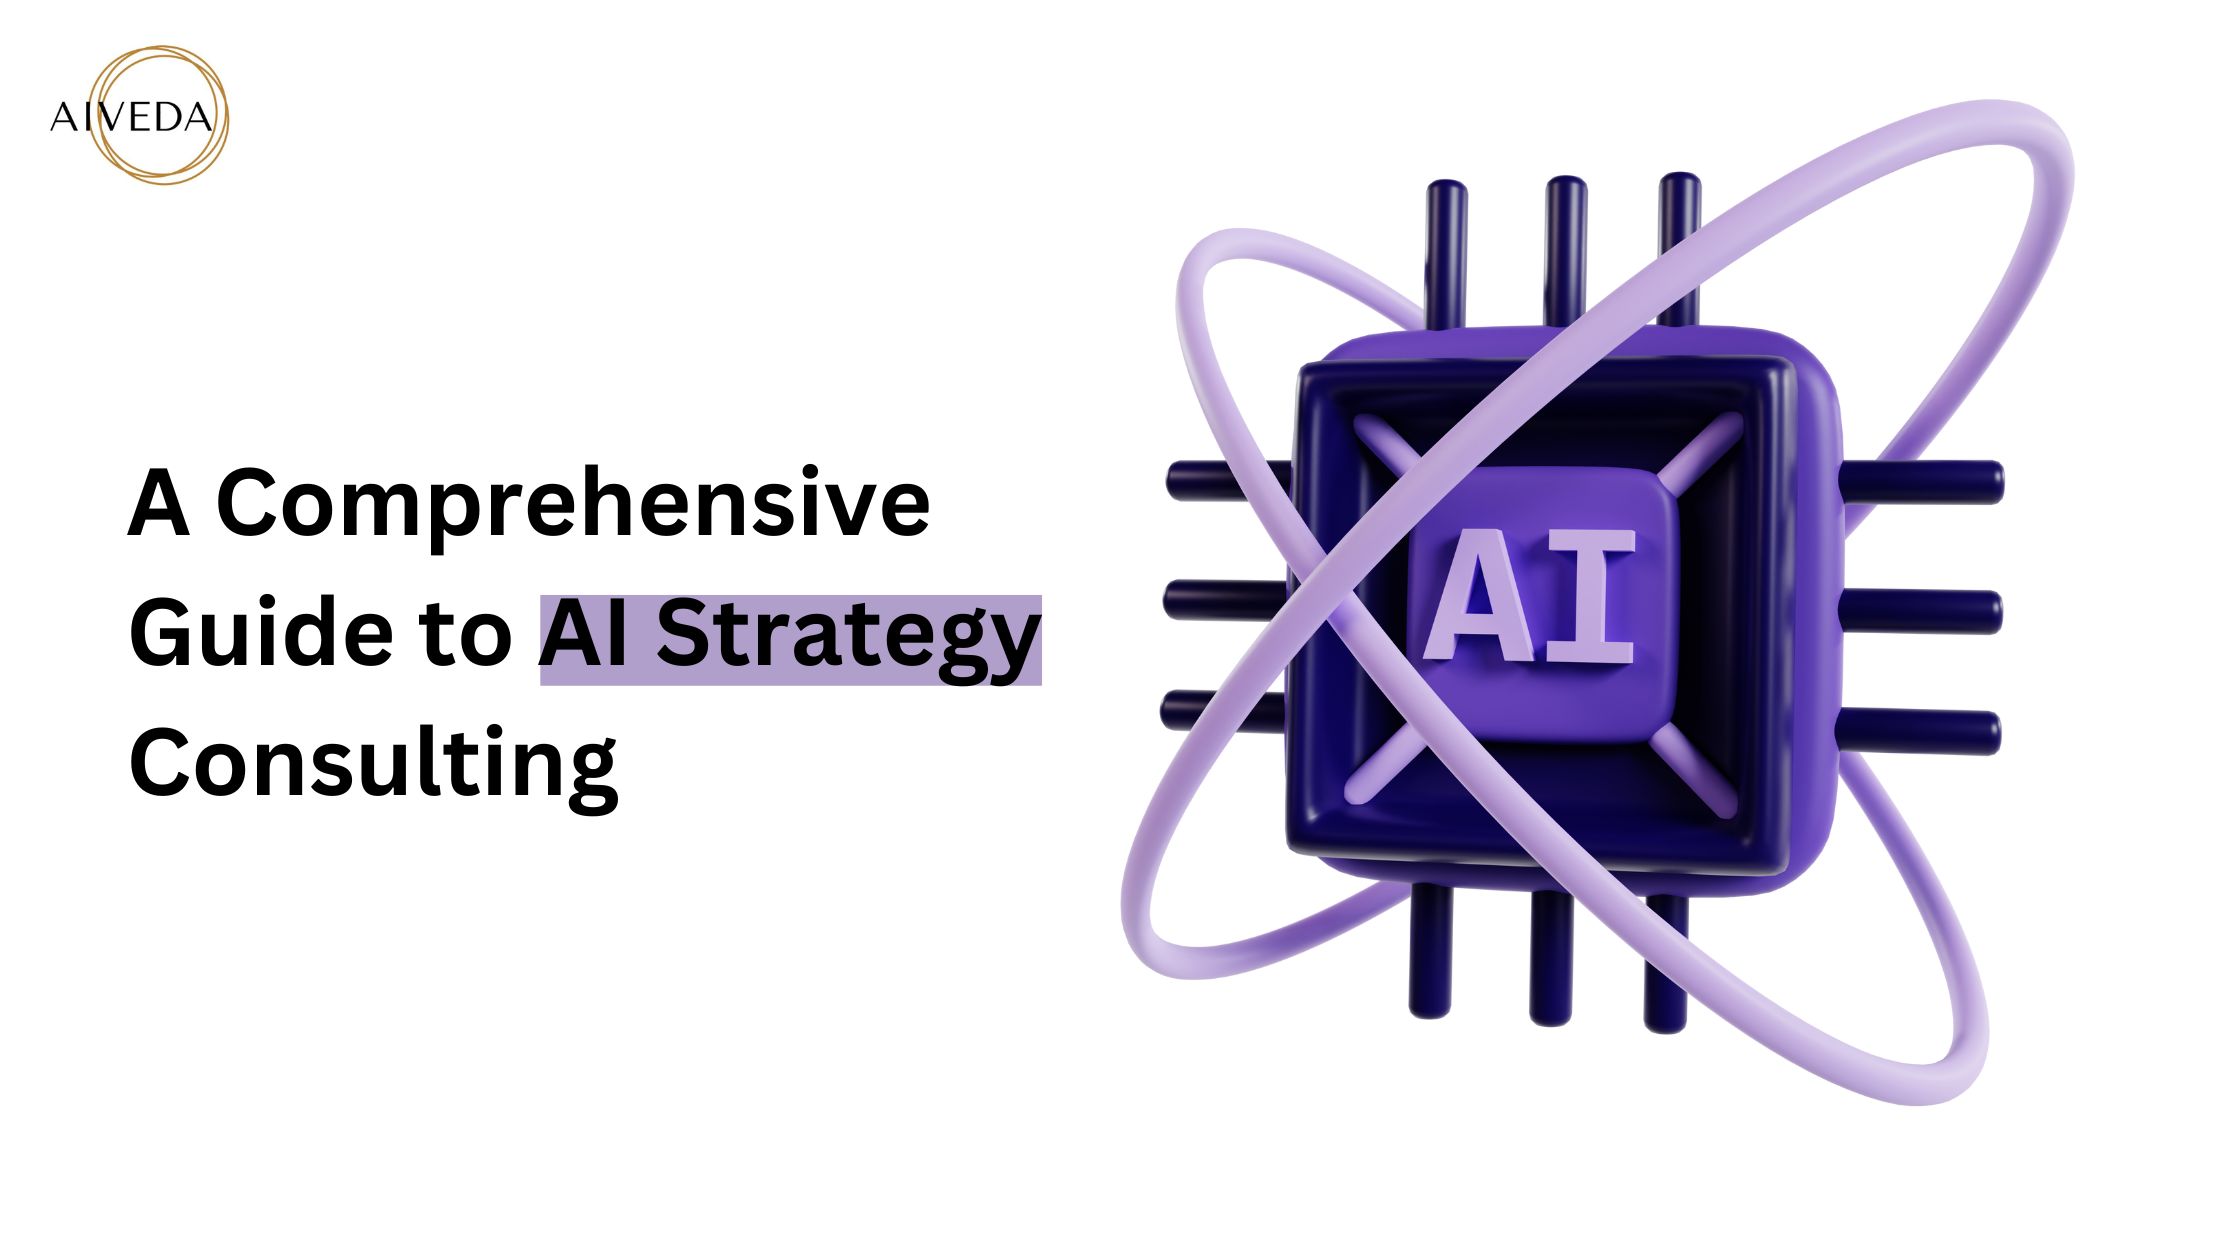 A Comprehensive Guide to AI Strategy Consulting